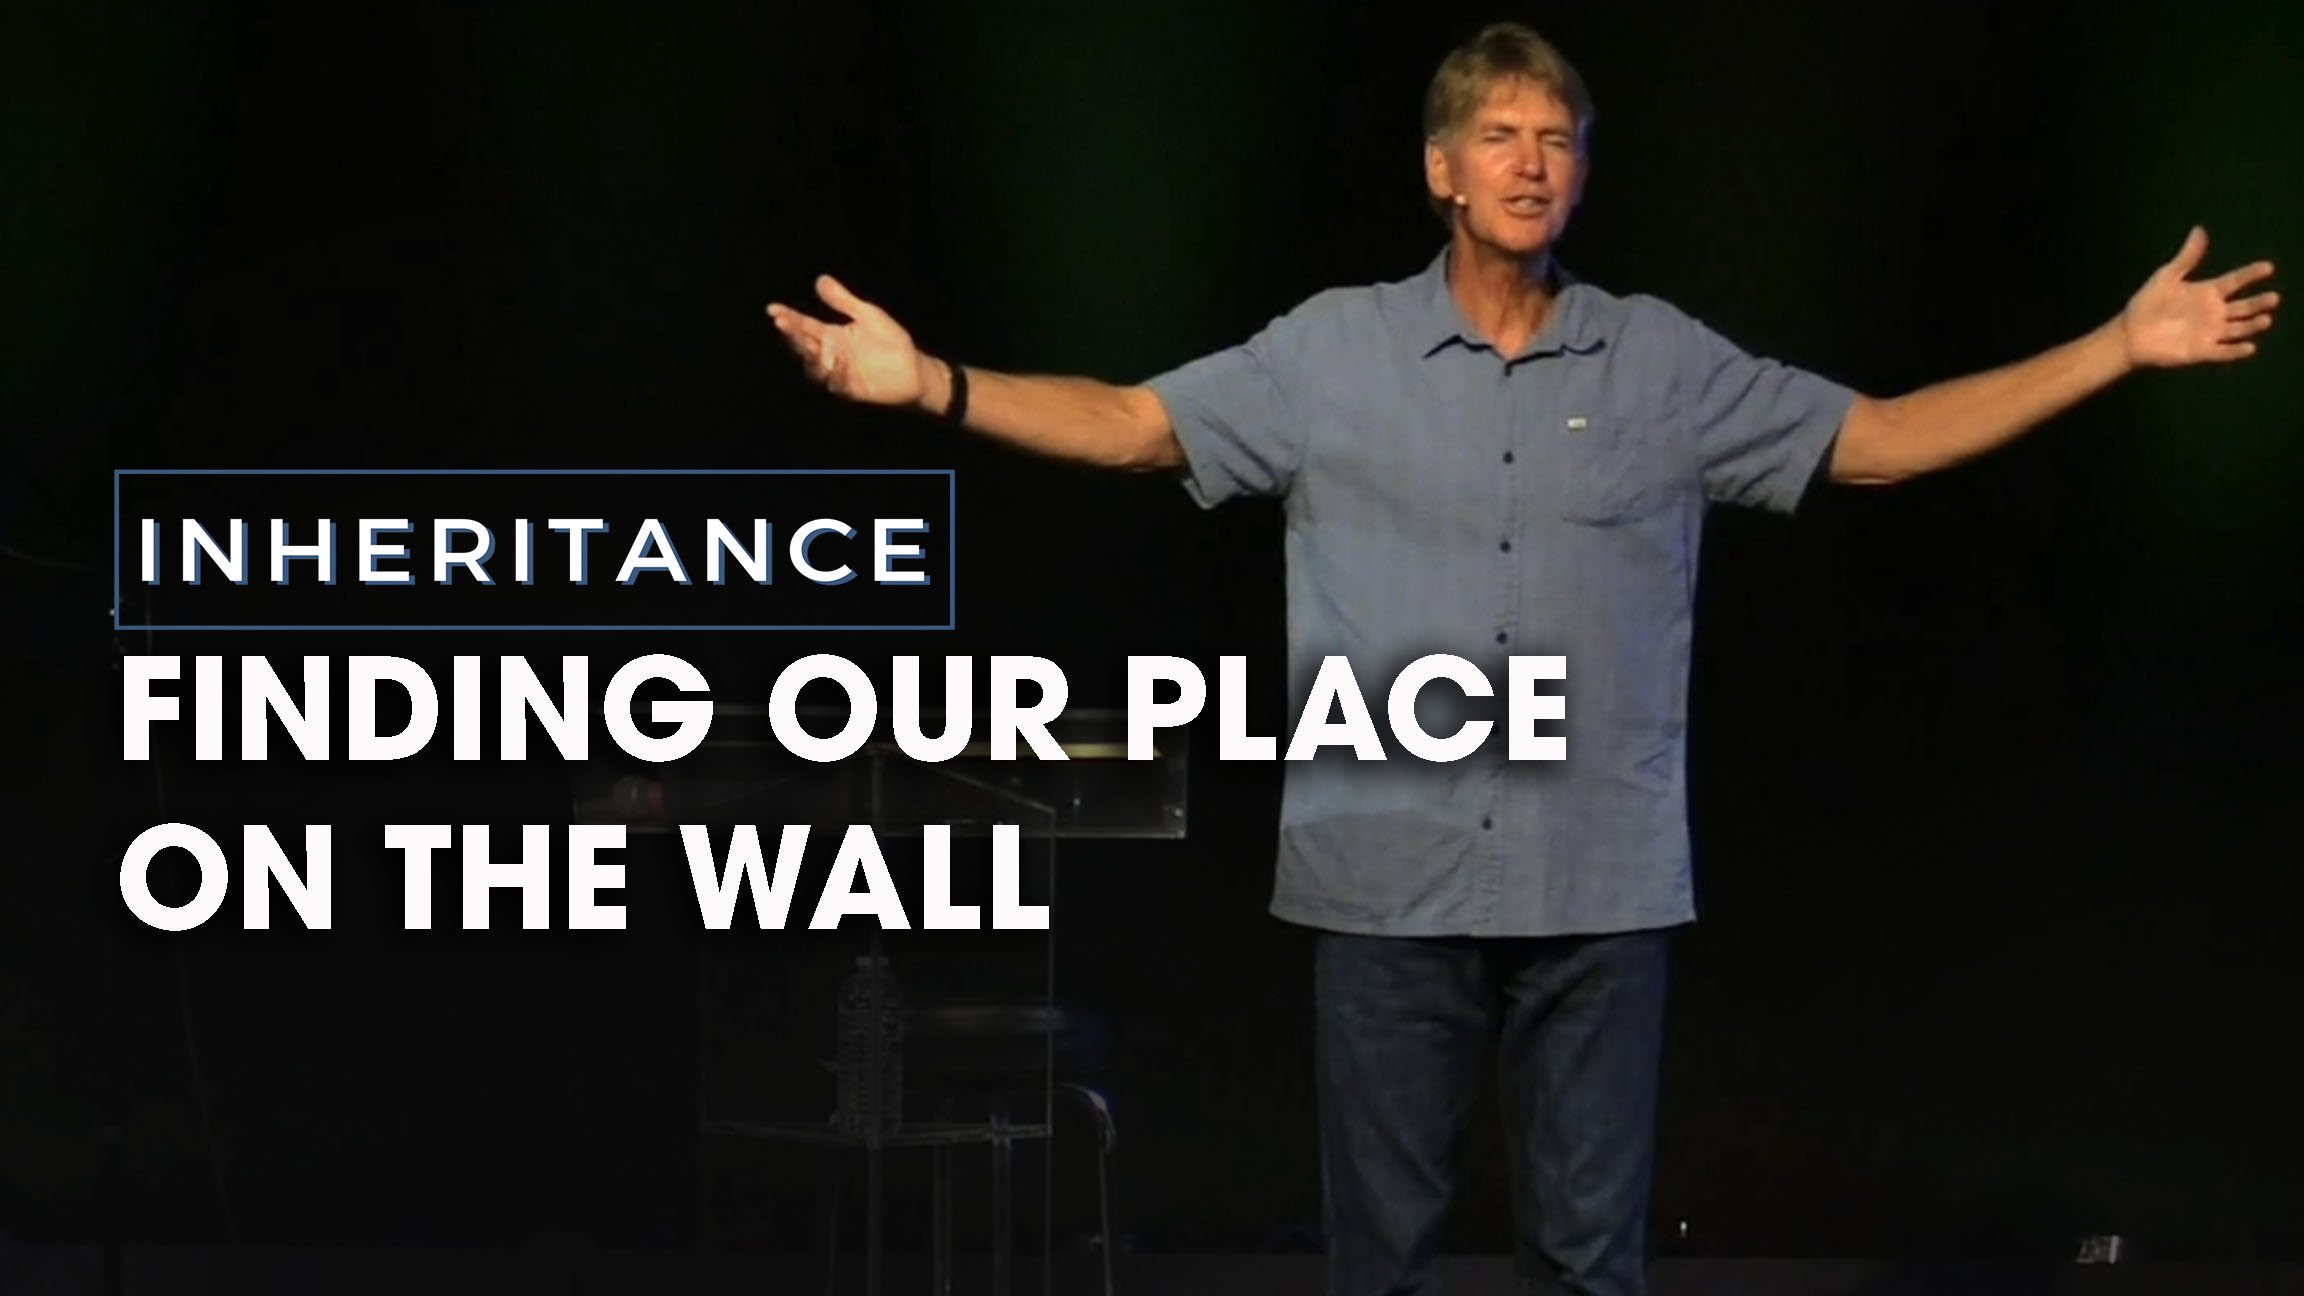 INHERITANCE Men’s Gathering – Finding Our Place on the Wall